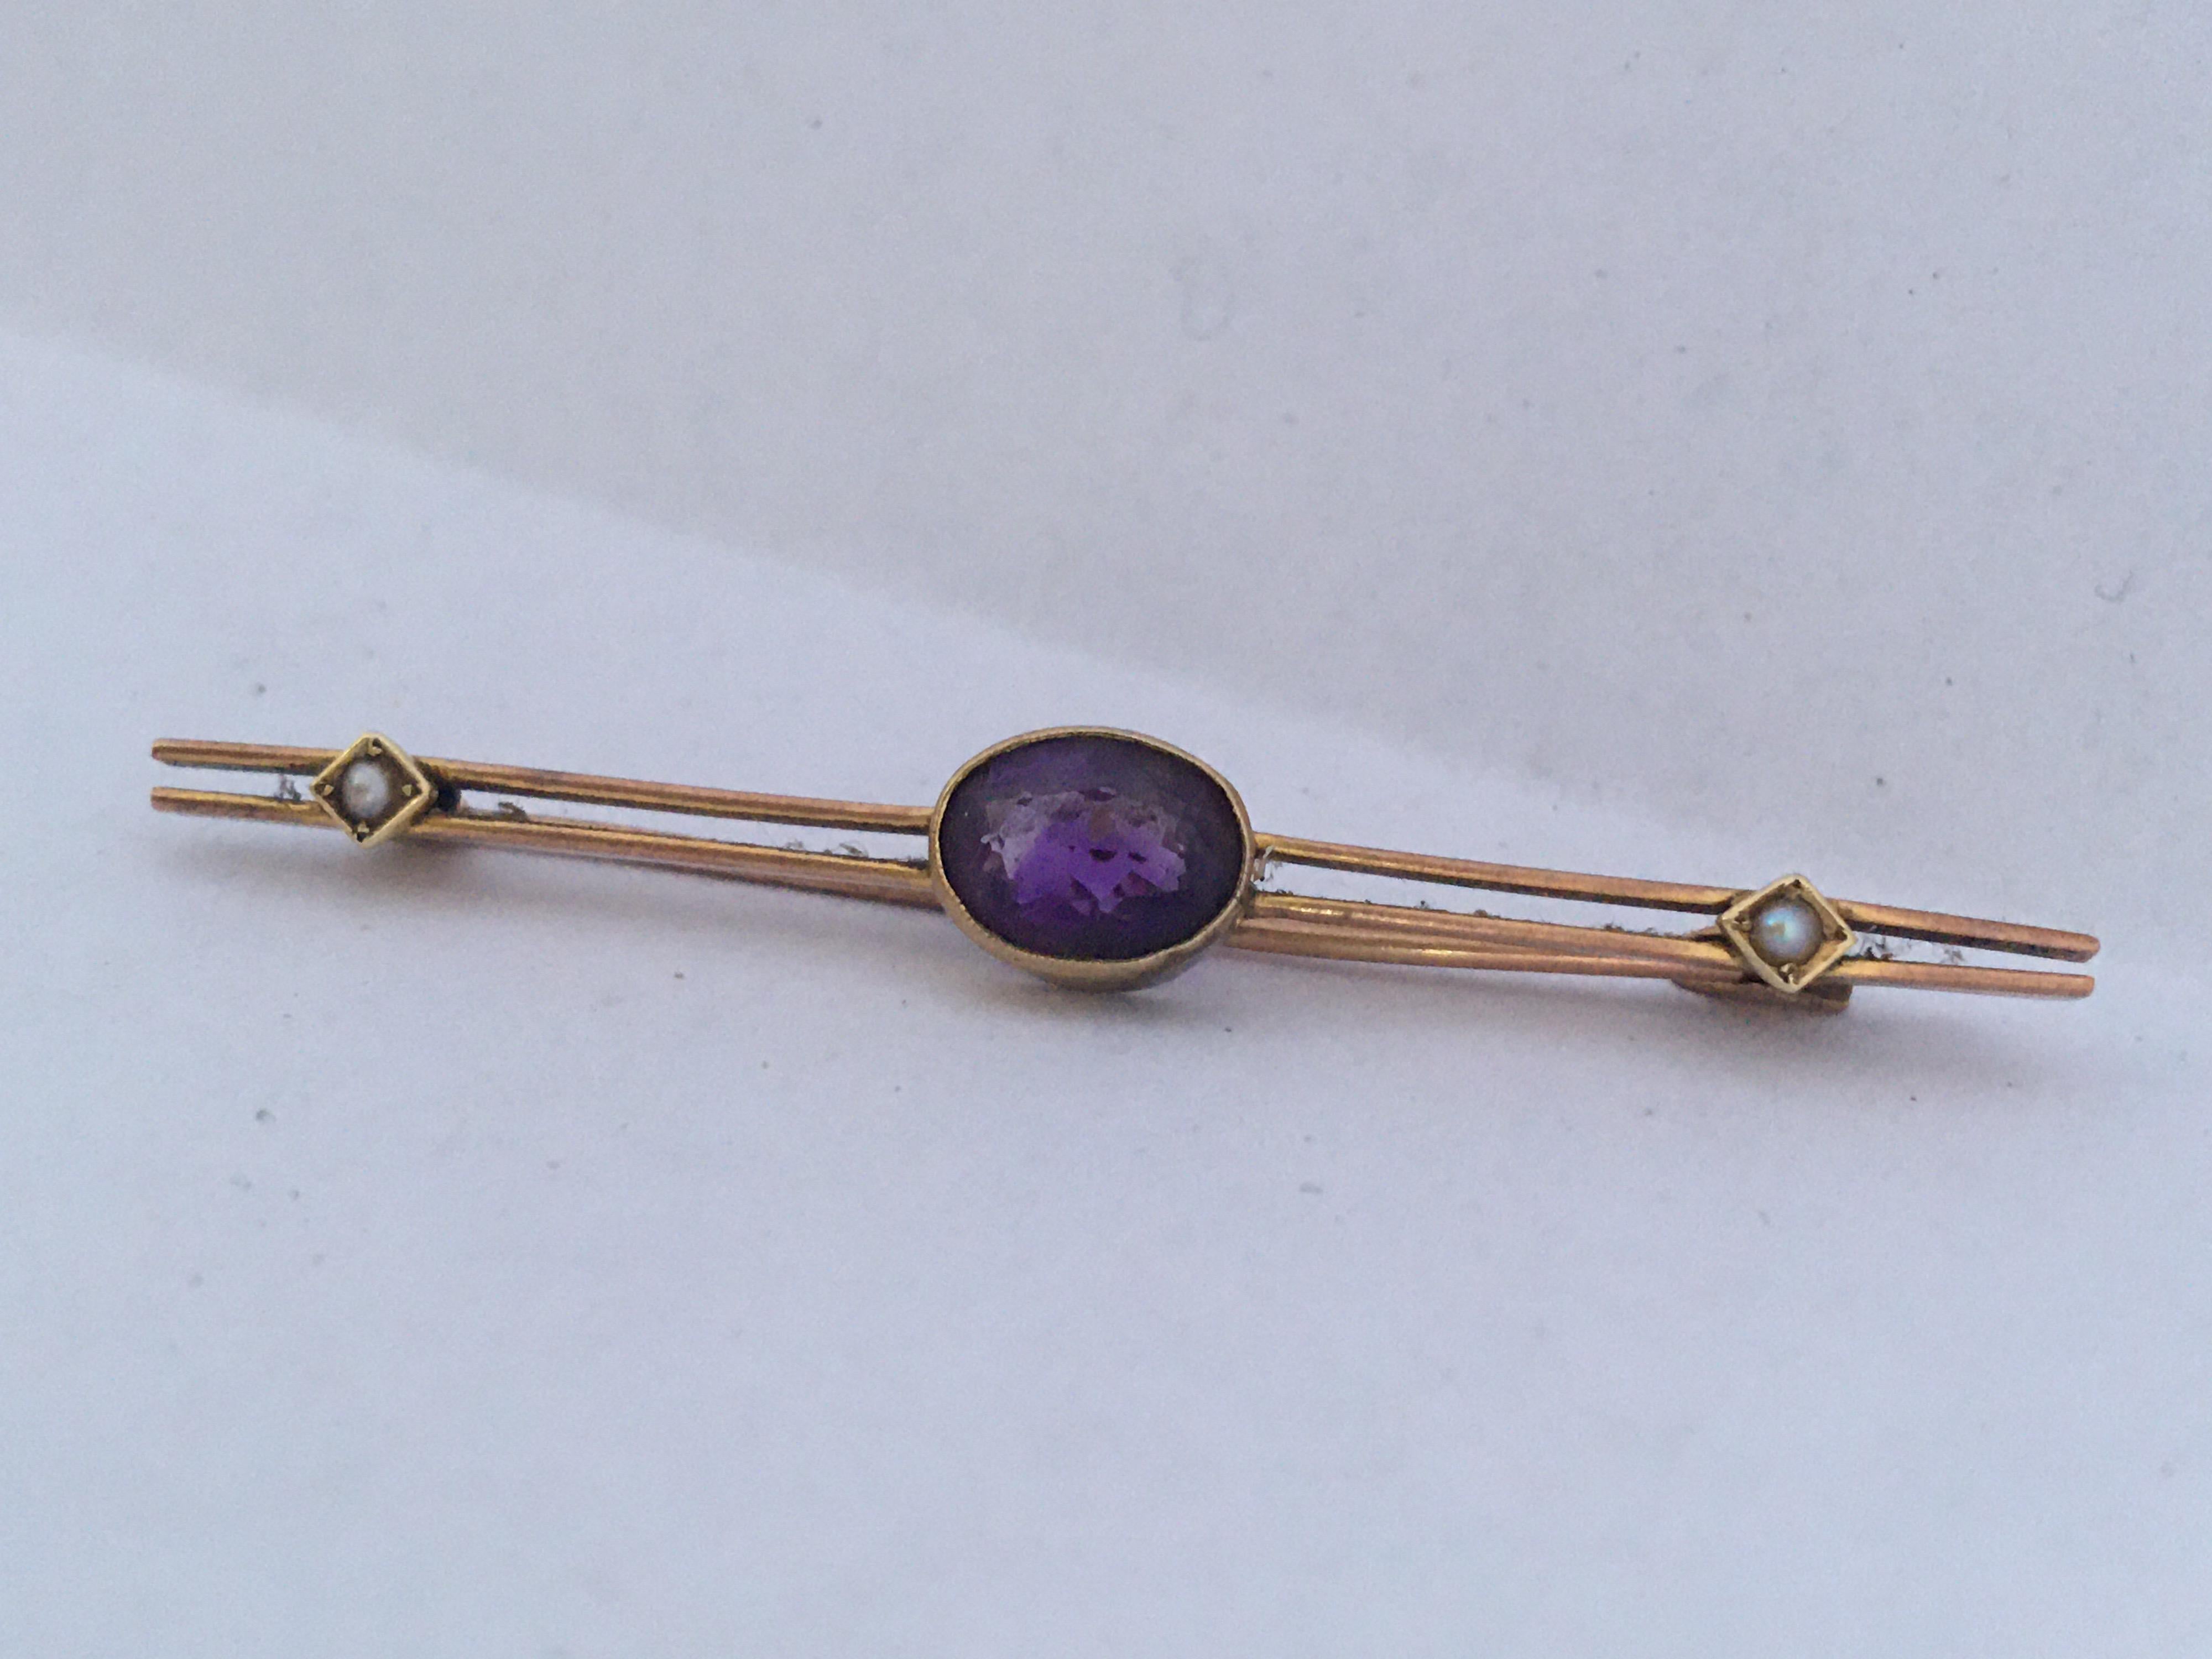 This elegant pin made of 10 Karat yellow gold and is hallmarked. It has a sparkling faceted deep purple amethyst gemstone which is a define set and open backed. a set of pearl on each side. This is in good vintage condition. It has a good pin,